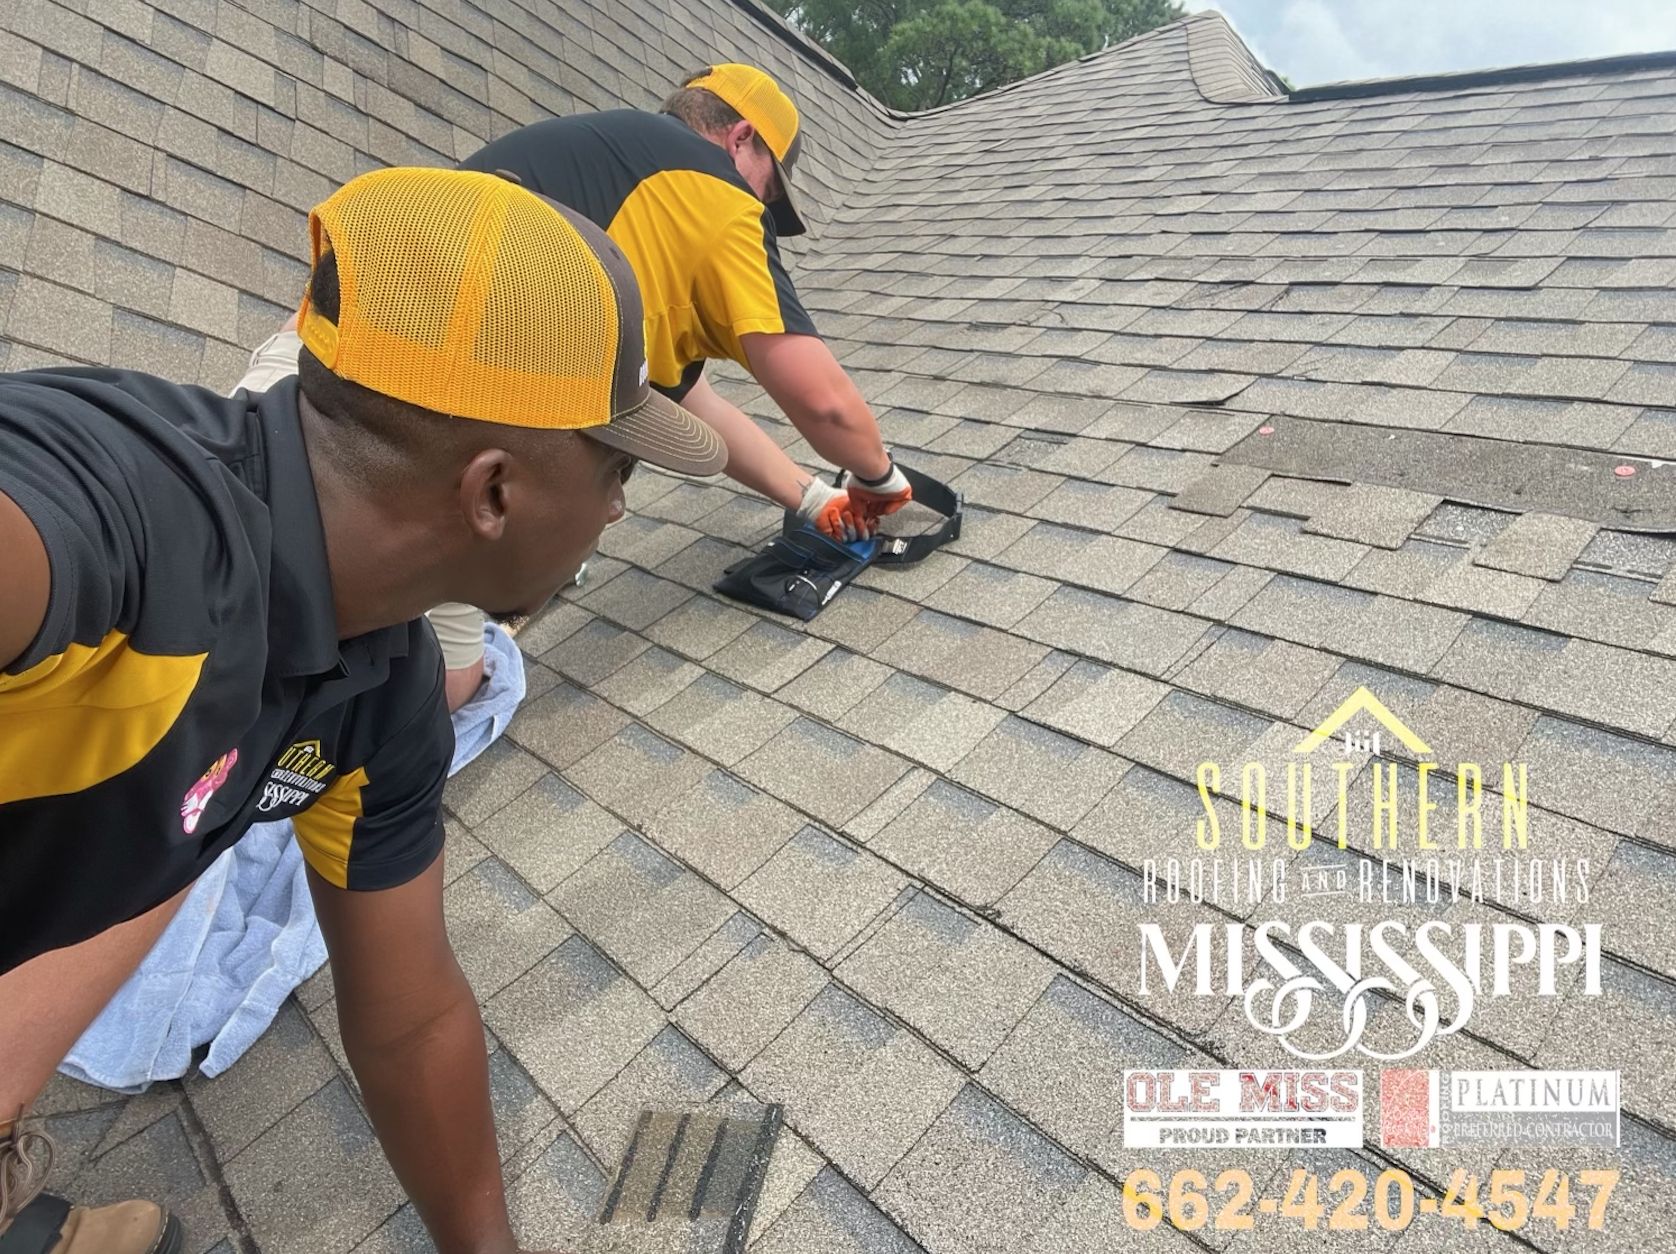 Tupelo, MS Roofers, Oxford, MS Roofers, Southaven, MS Roofers; Roofing Companies, Roof Repair, Roof Replacement Mississippi